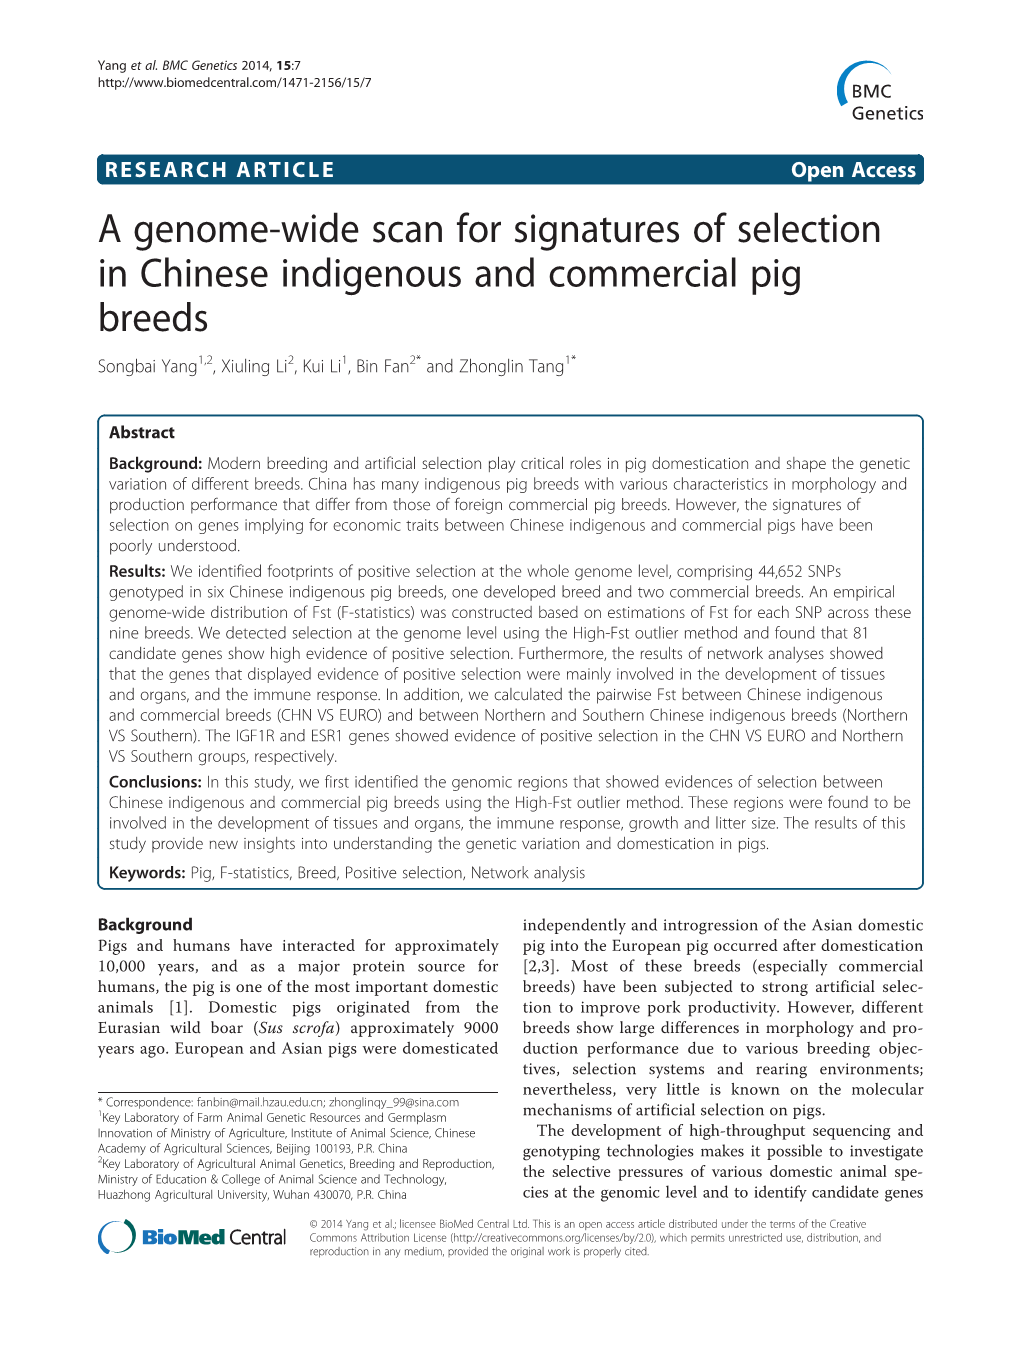 A Genome-Wide Scan for Signatures of Selection in Chinese Indigenous and Commercial Pig Breeds Songbai Yang1,2, Xiuling Li2, Kui Li1, Bin Fan2* and Zhonglin Tang1*